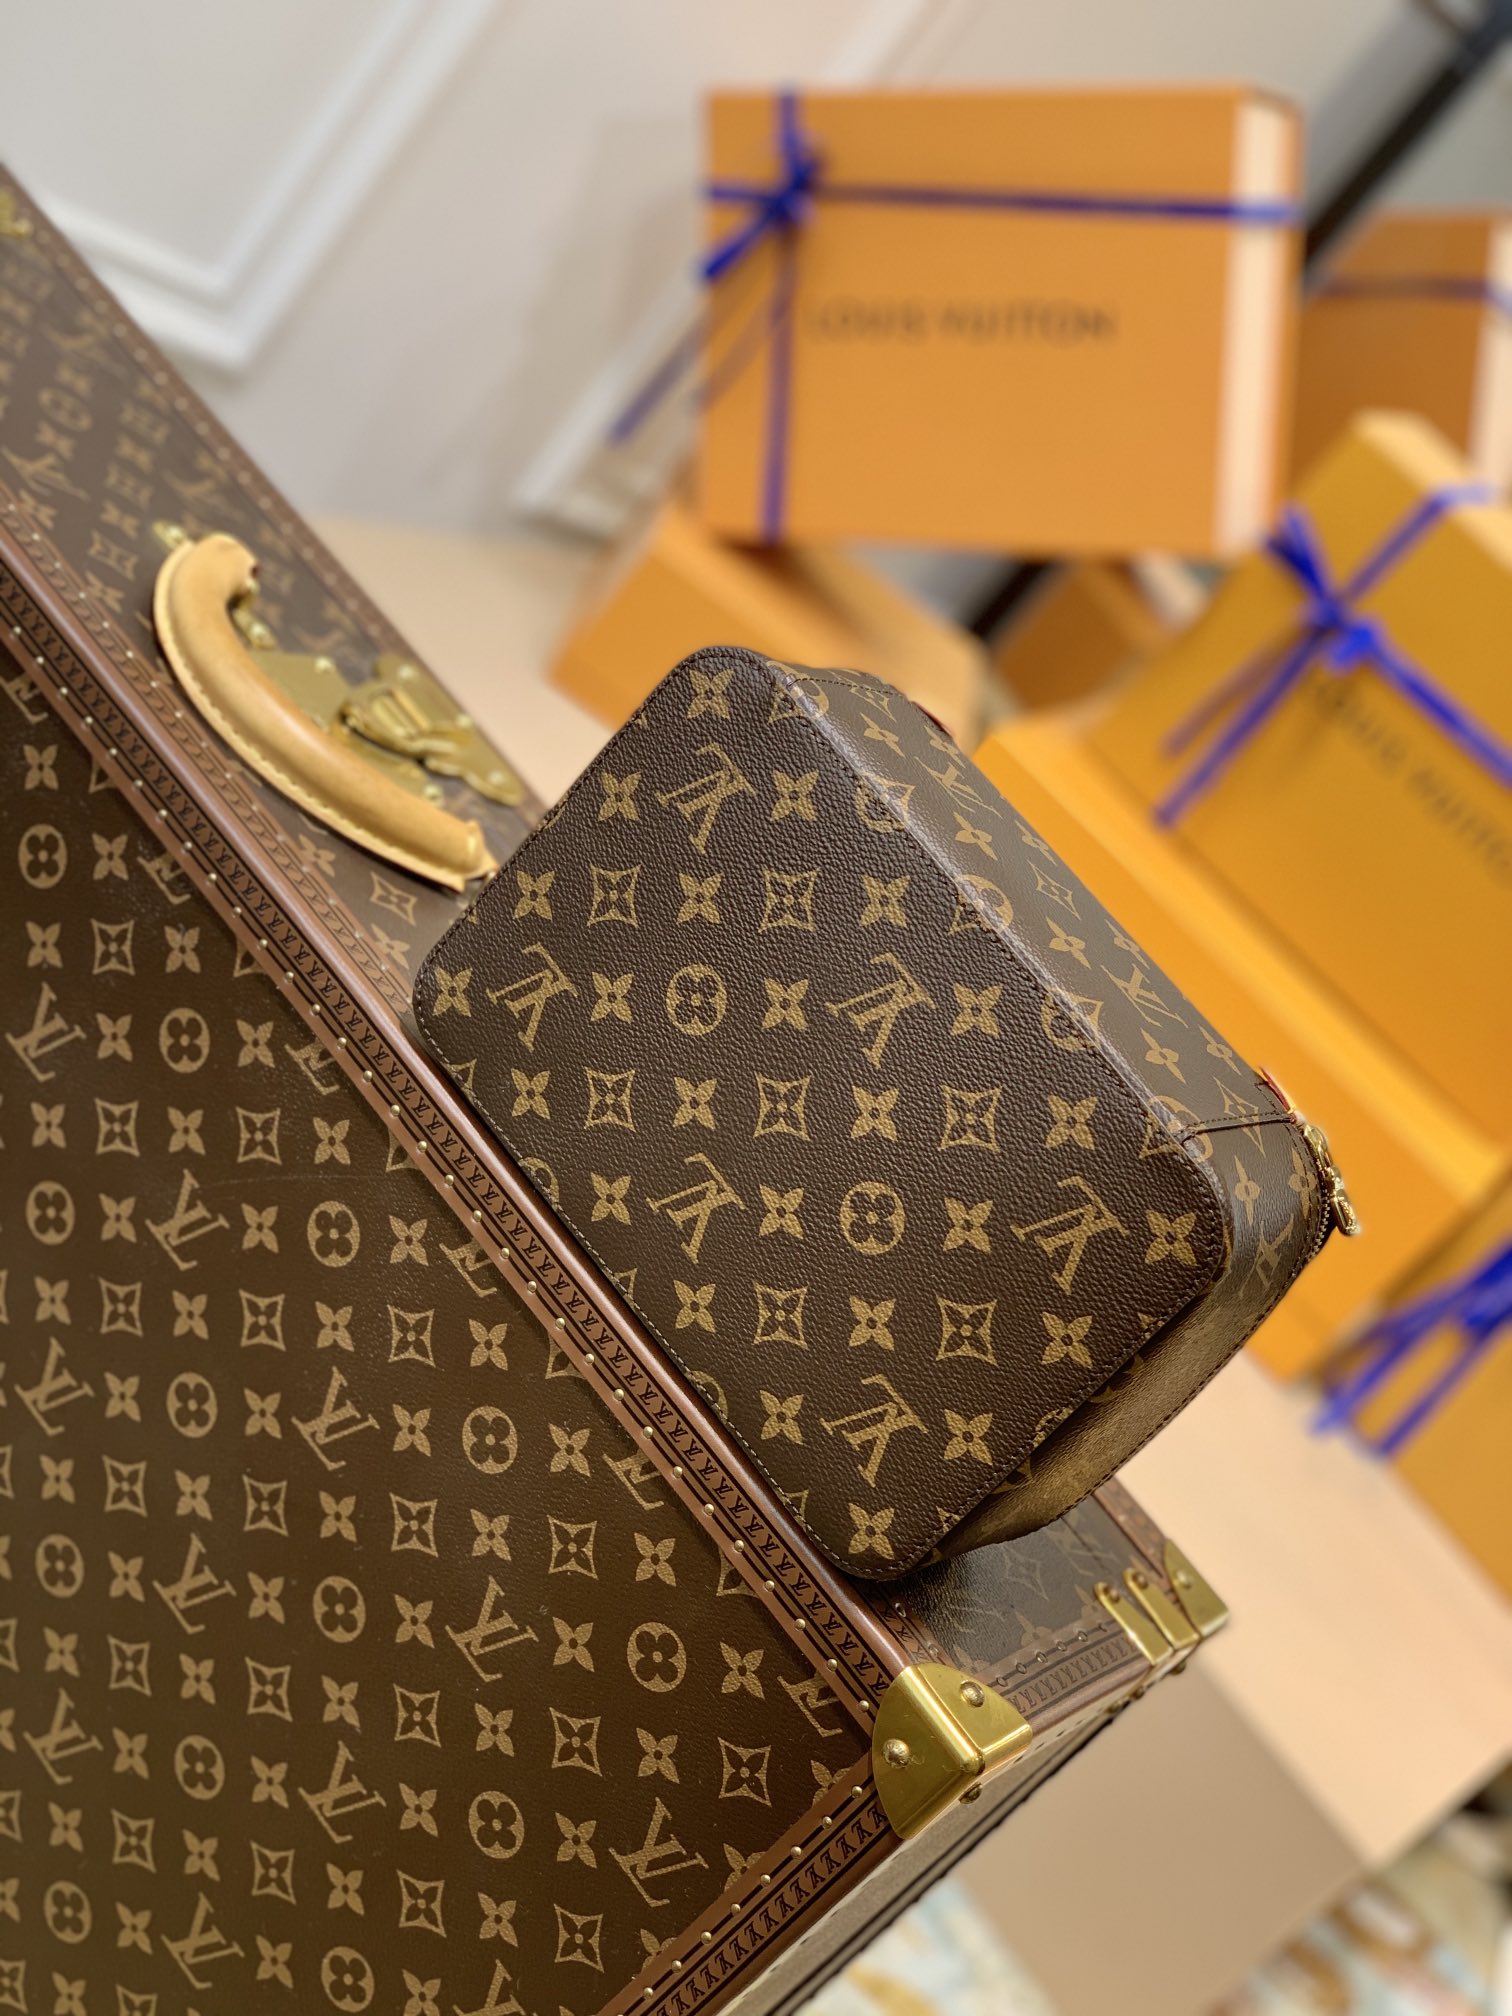 Louis Vuitton M43689 LV Packing Cube MM in Monogram canvas Replica sale  online ,buy fake bag